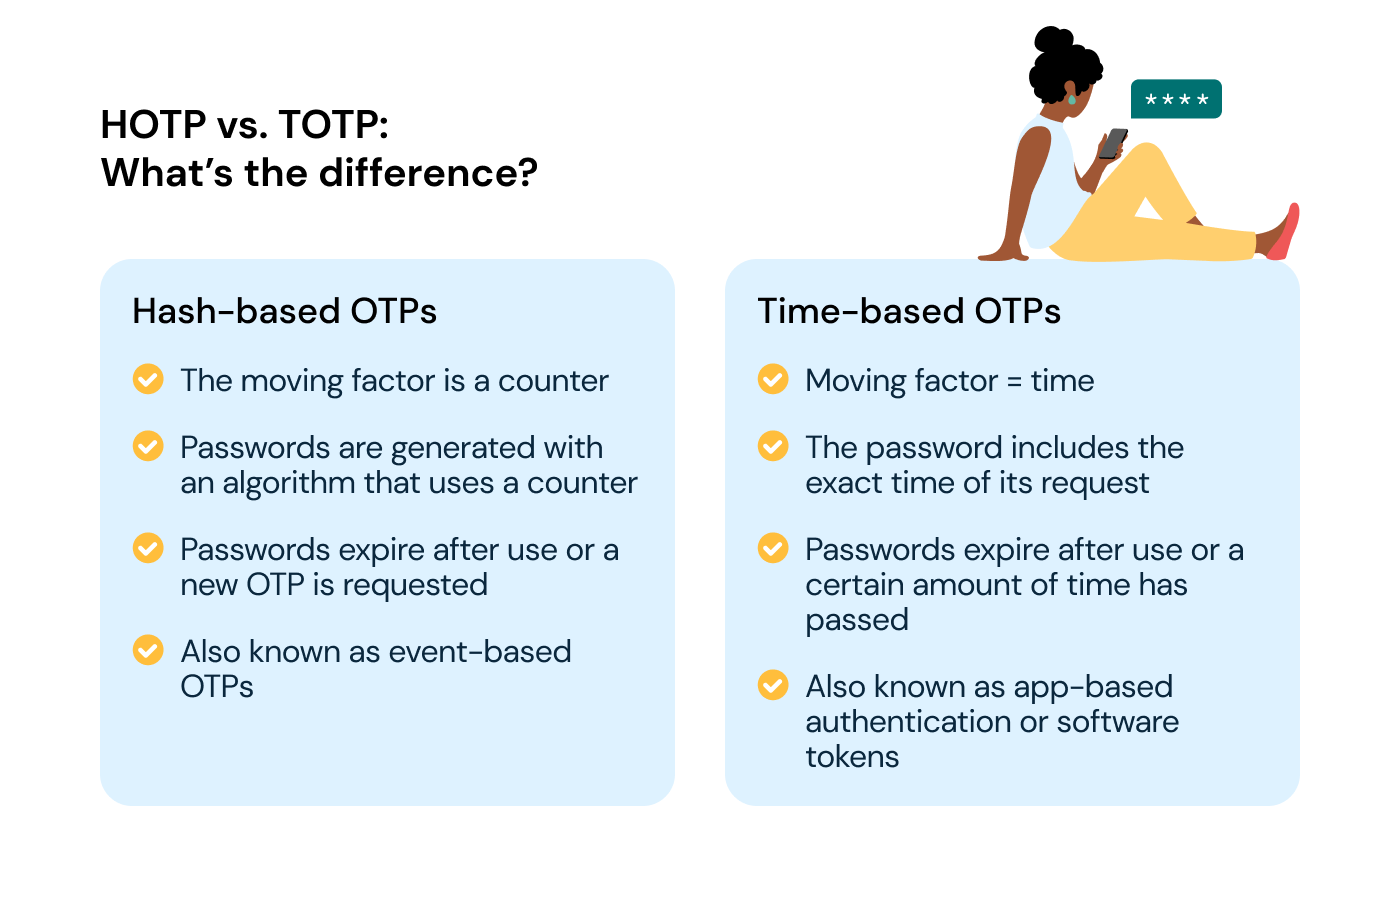 What is a Time-Based One-Time Password? - Definition from WhatIs.com